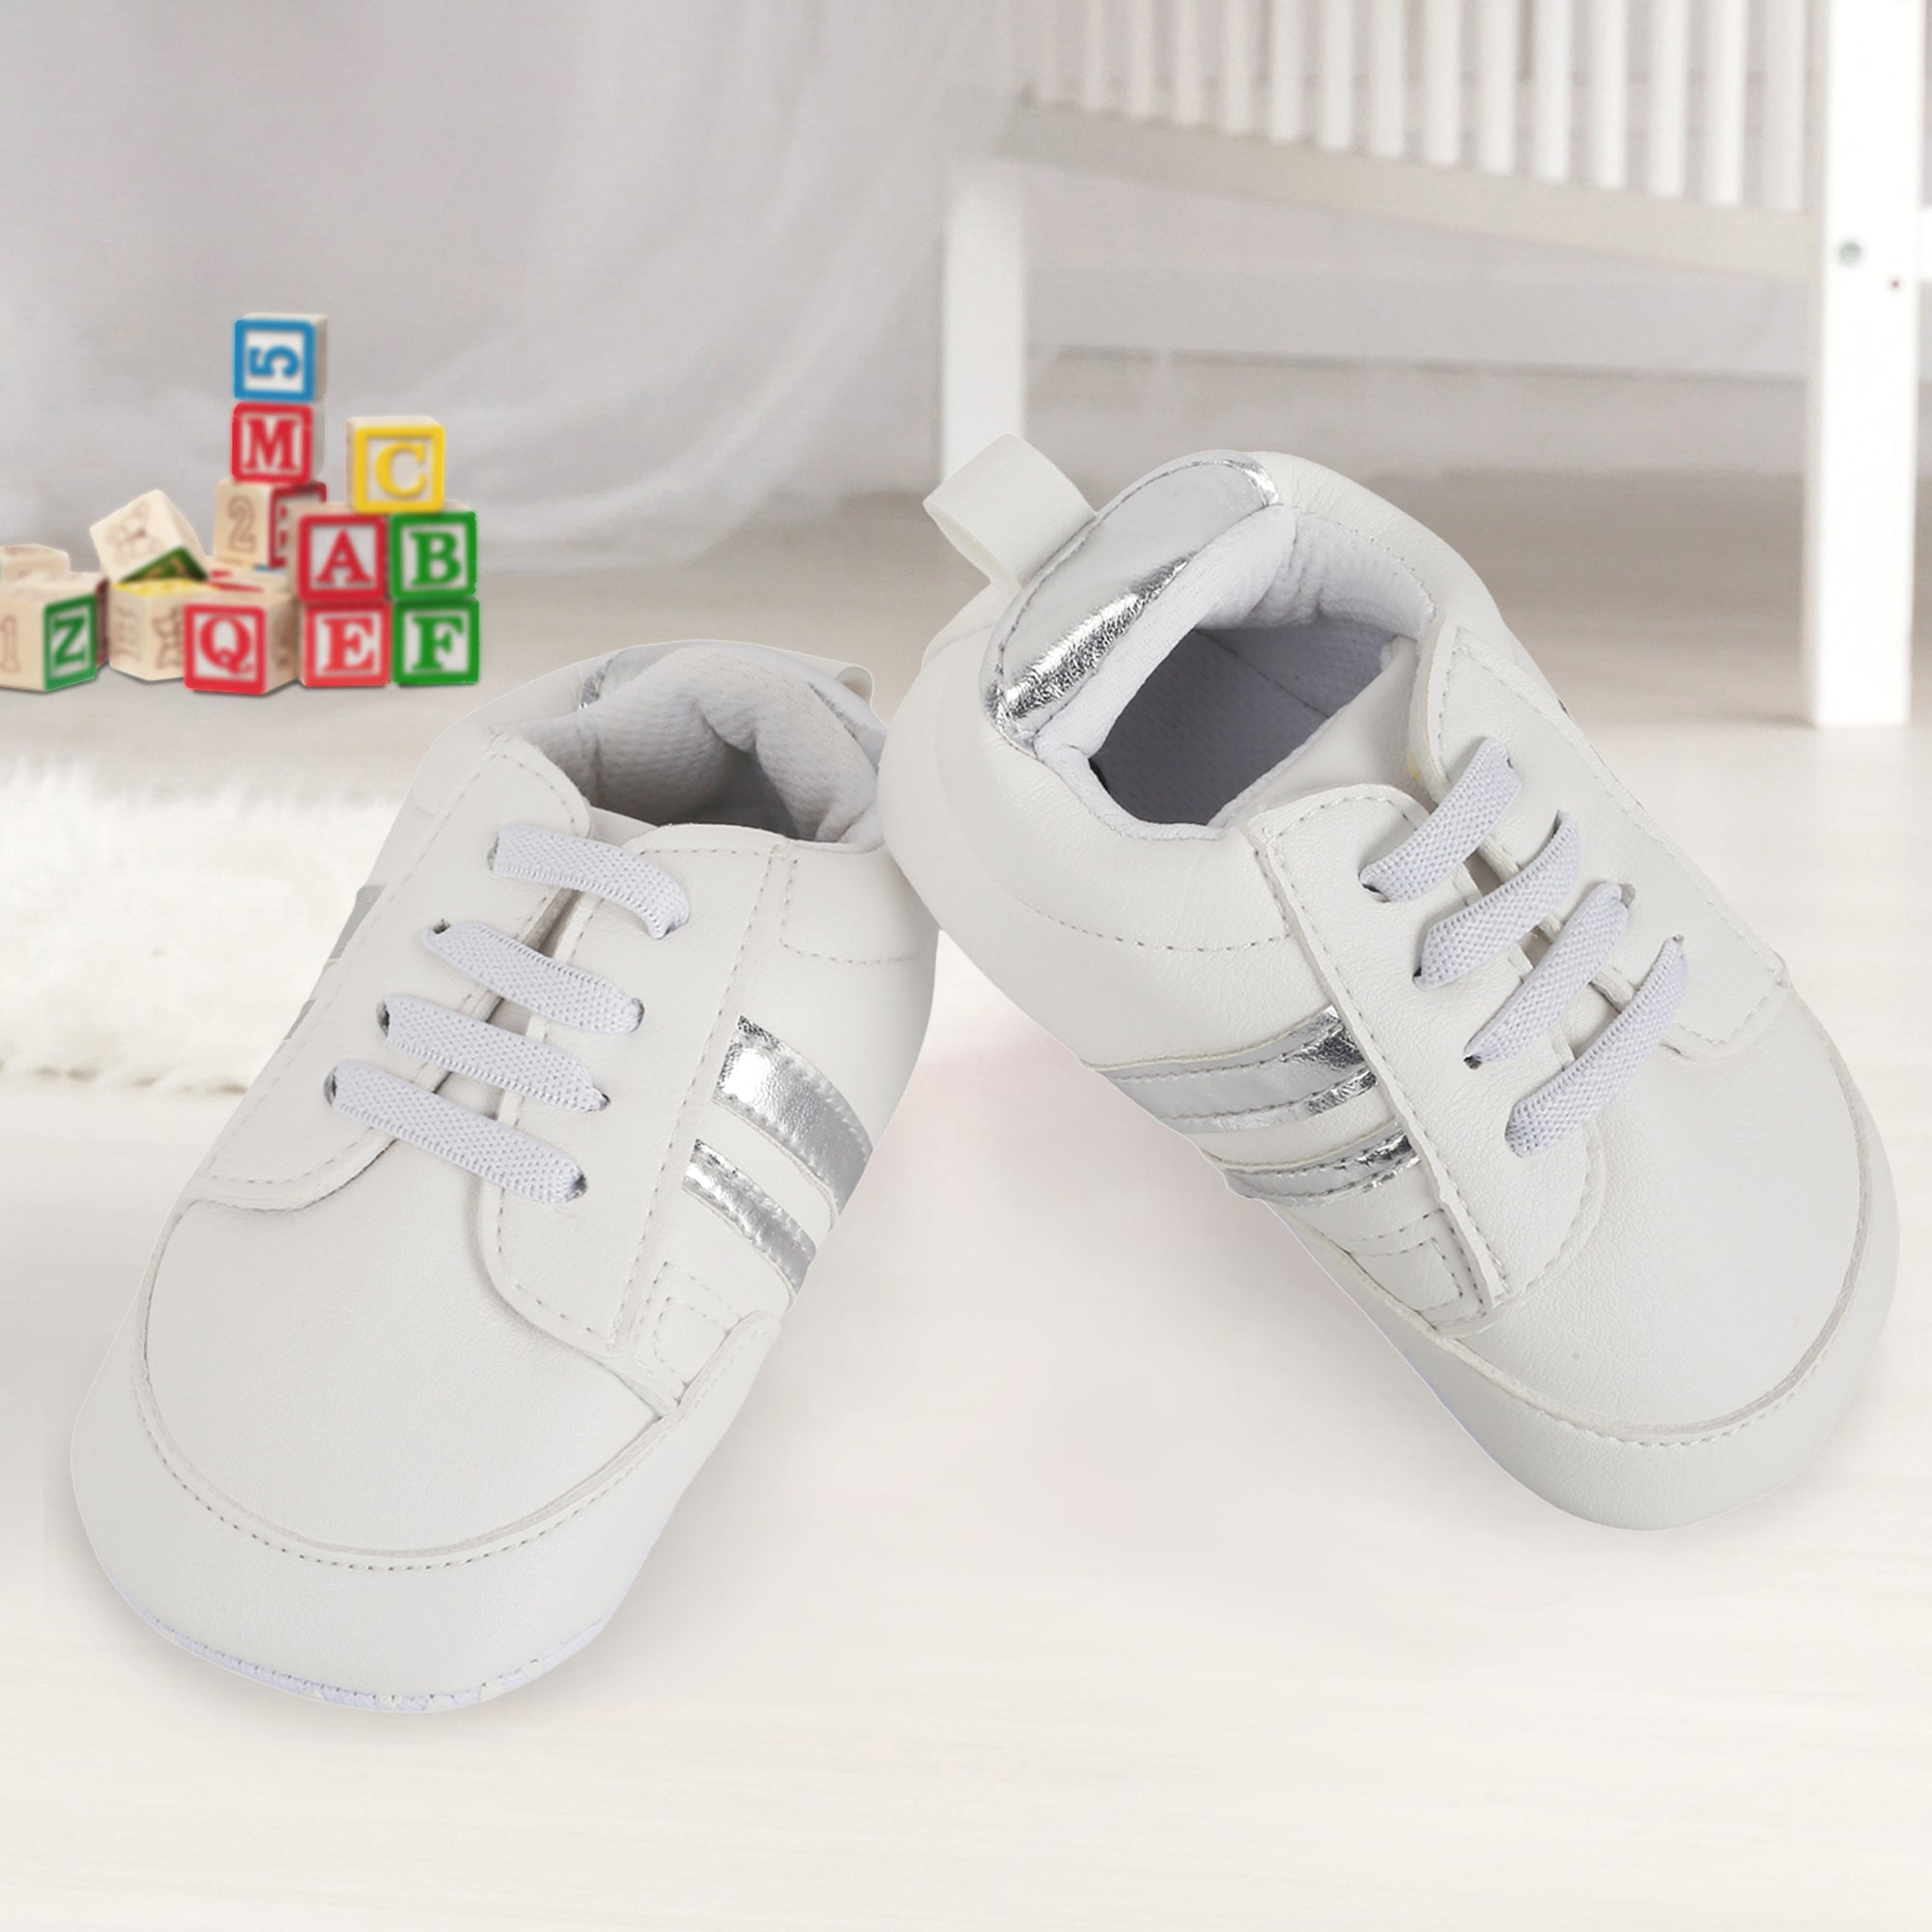 Over the Moon Baby Shoes – National Archives Store